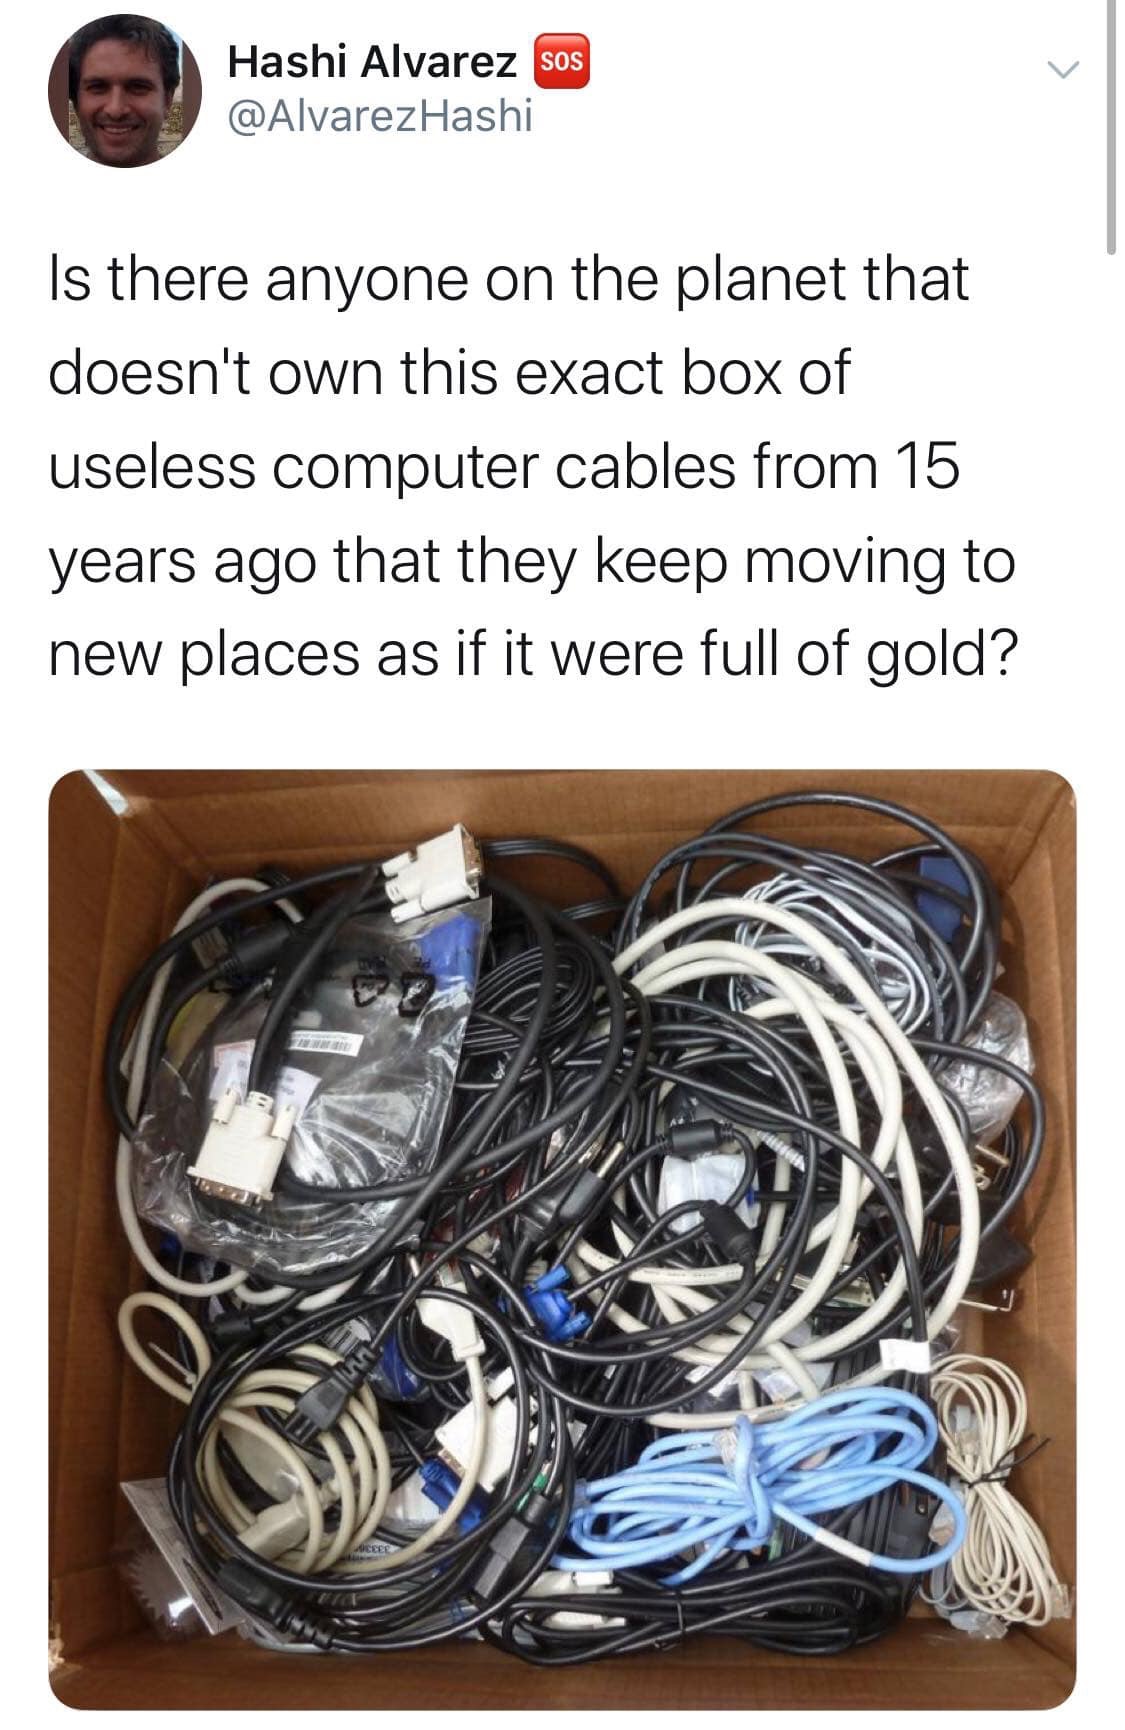 electronics accessory - Hashi Alvarez sos Is there anyone on the planet that doesn't own this exact box of useless computer cables from 15 years ago that they keep moving to new places as if it were full of gold?